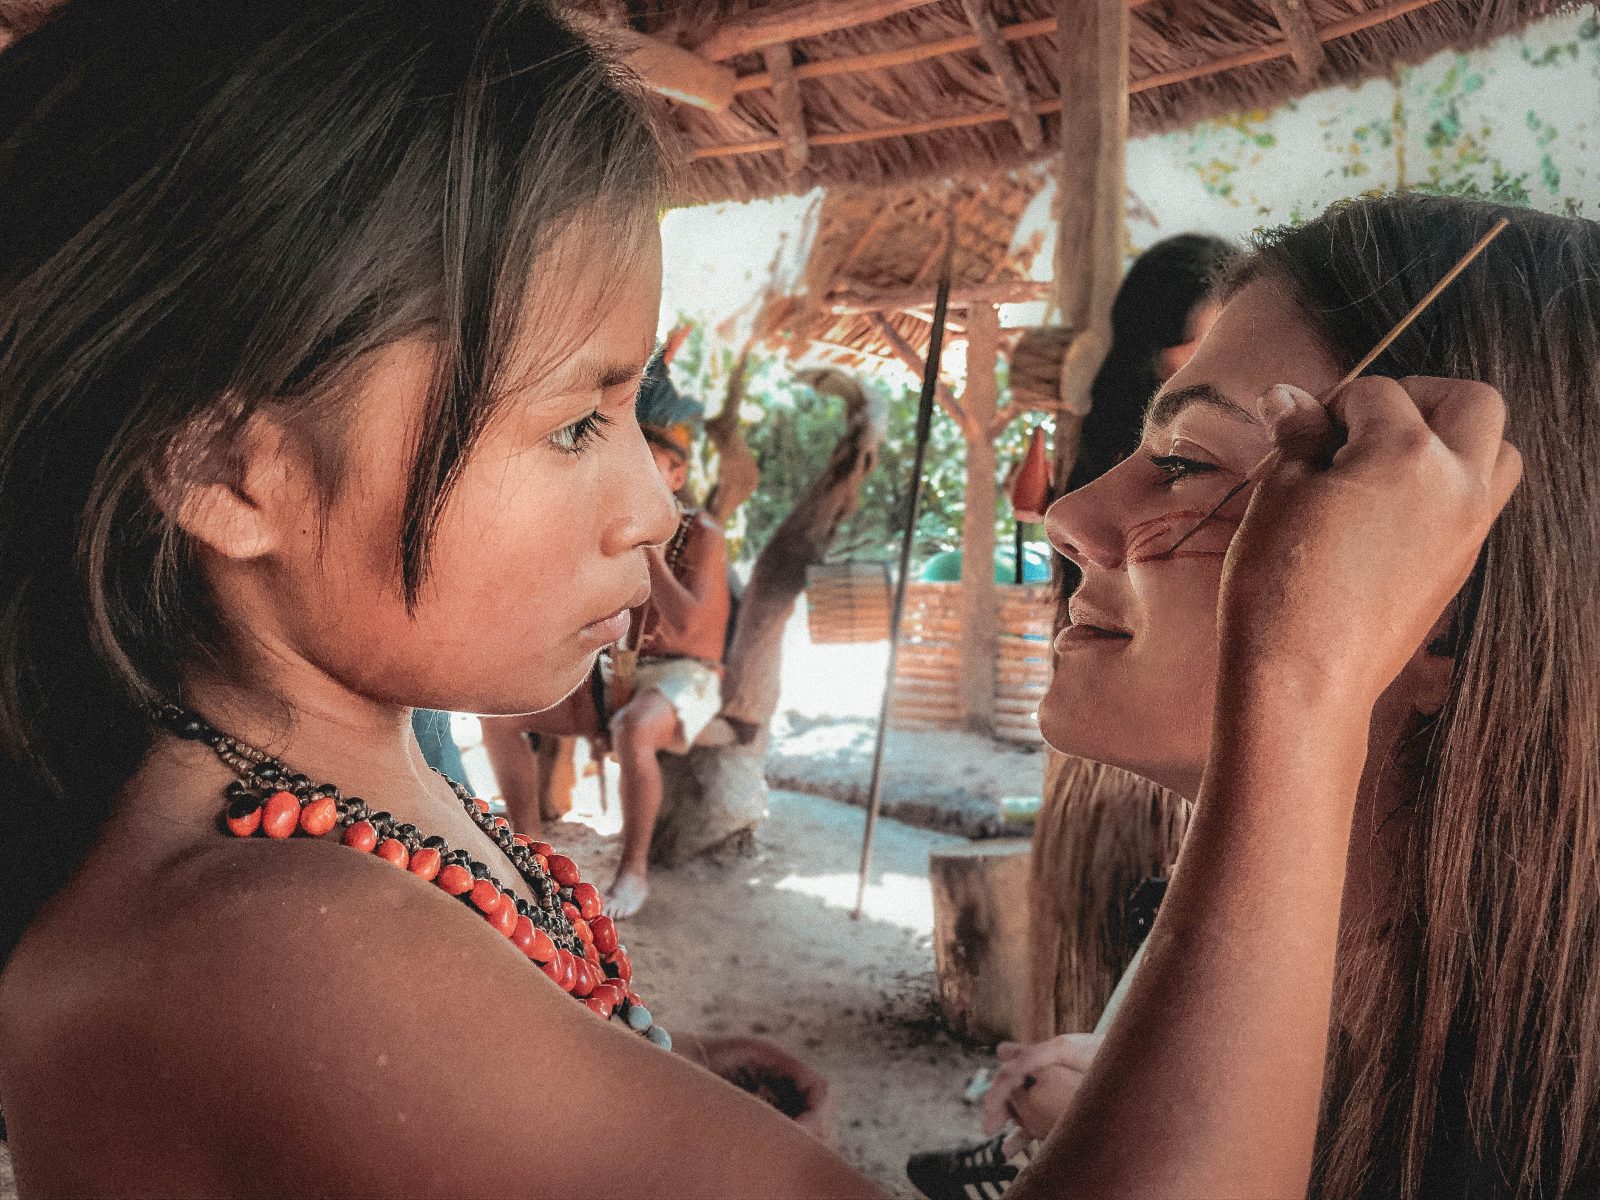 A little girl from Amazonia making a tattoo face